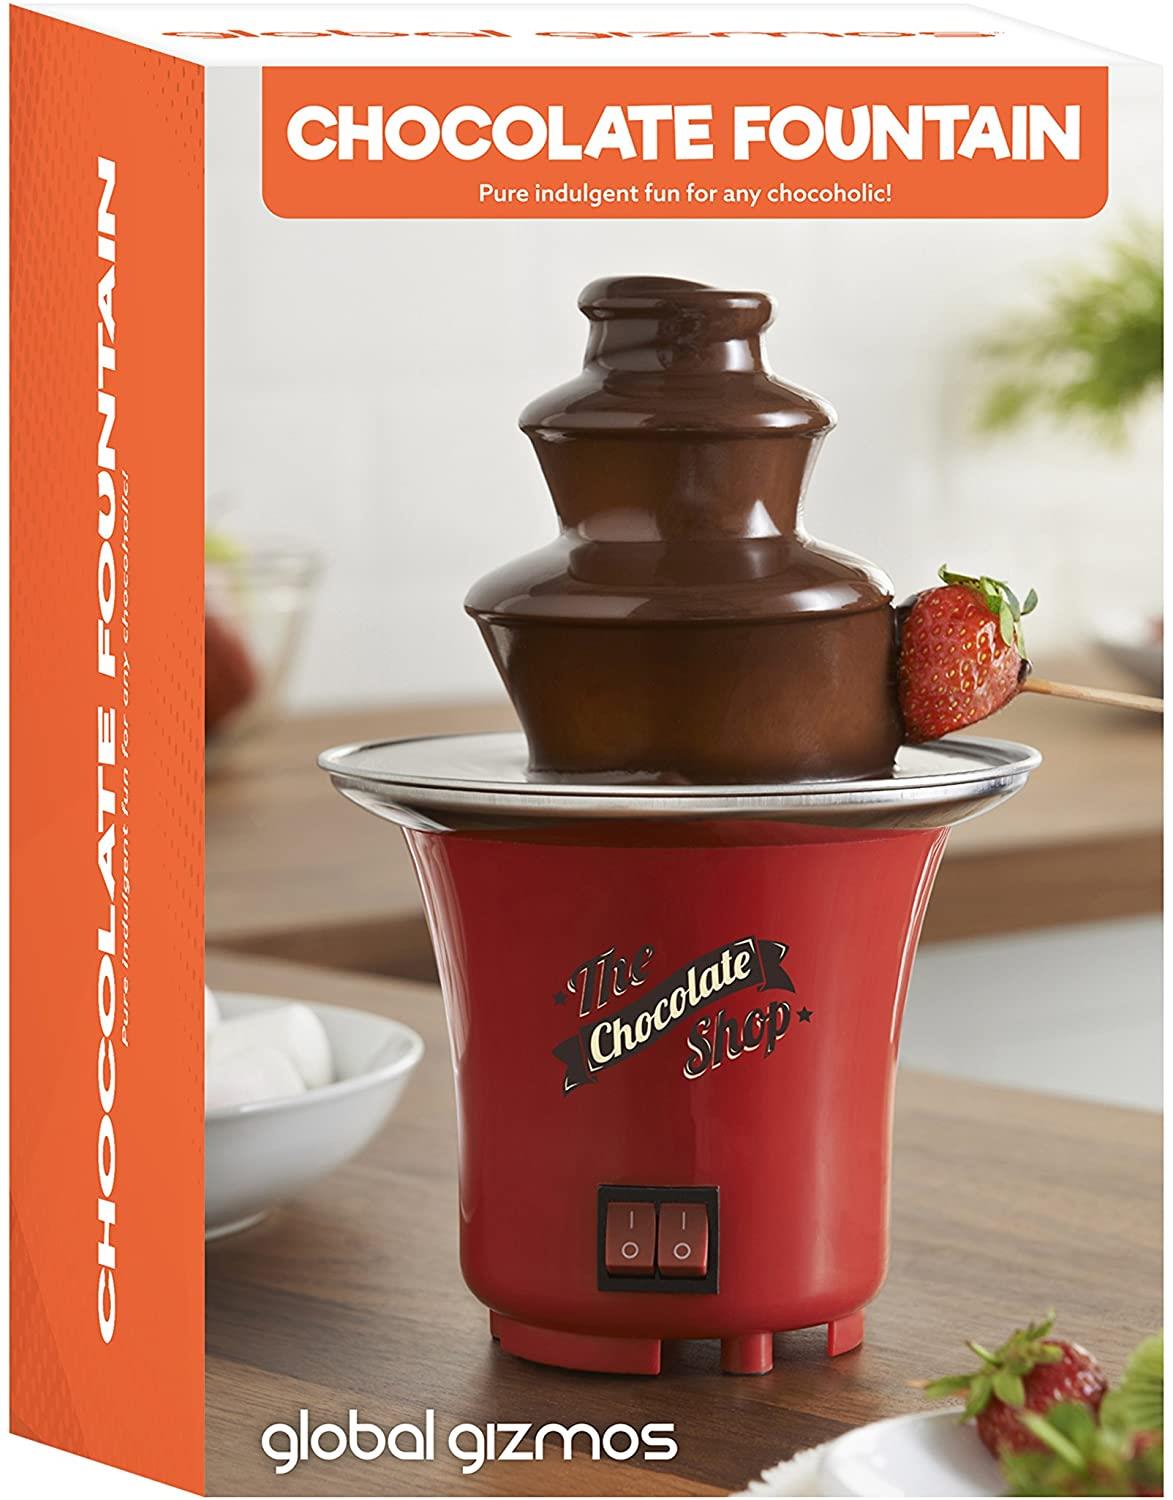 Global Gizmos Chocolate Fountain Table Top Machine Party Food 3 Tier Cascading 22cm x 14cm 65 W Red 50990